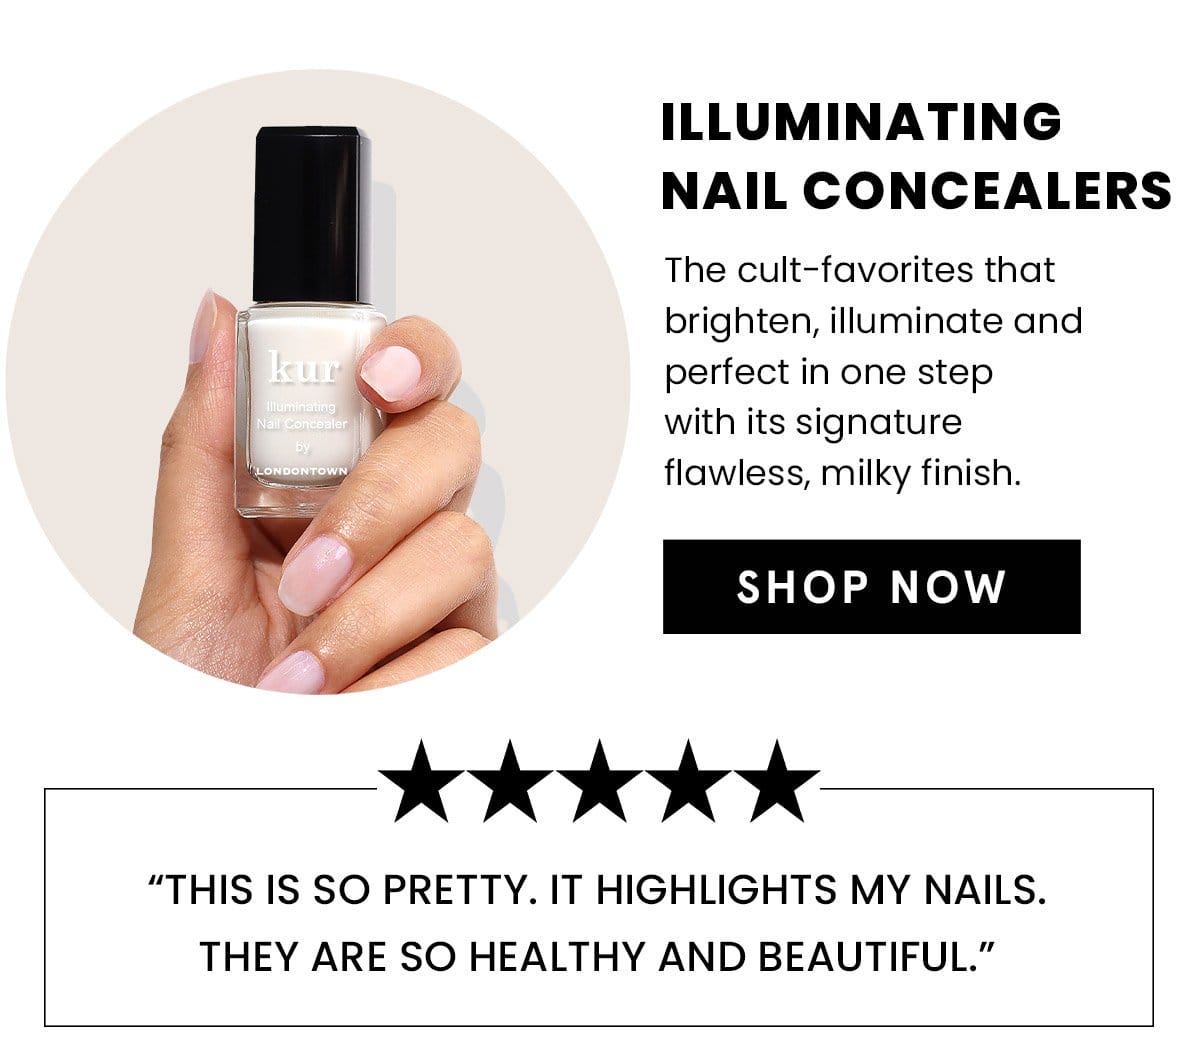 Illuminating Nail Concealers | Shop Now